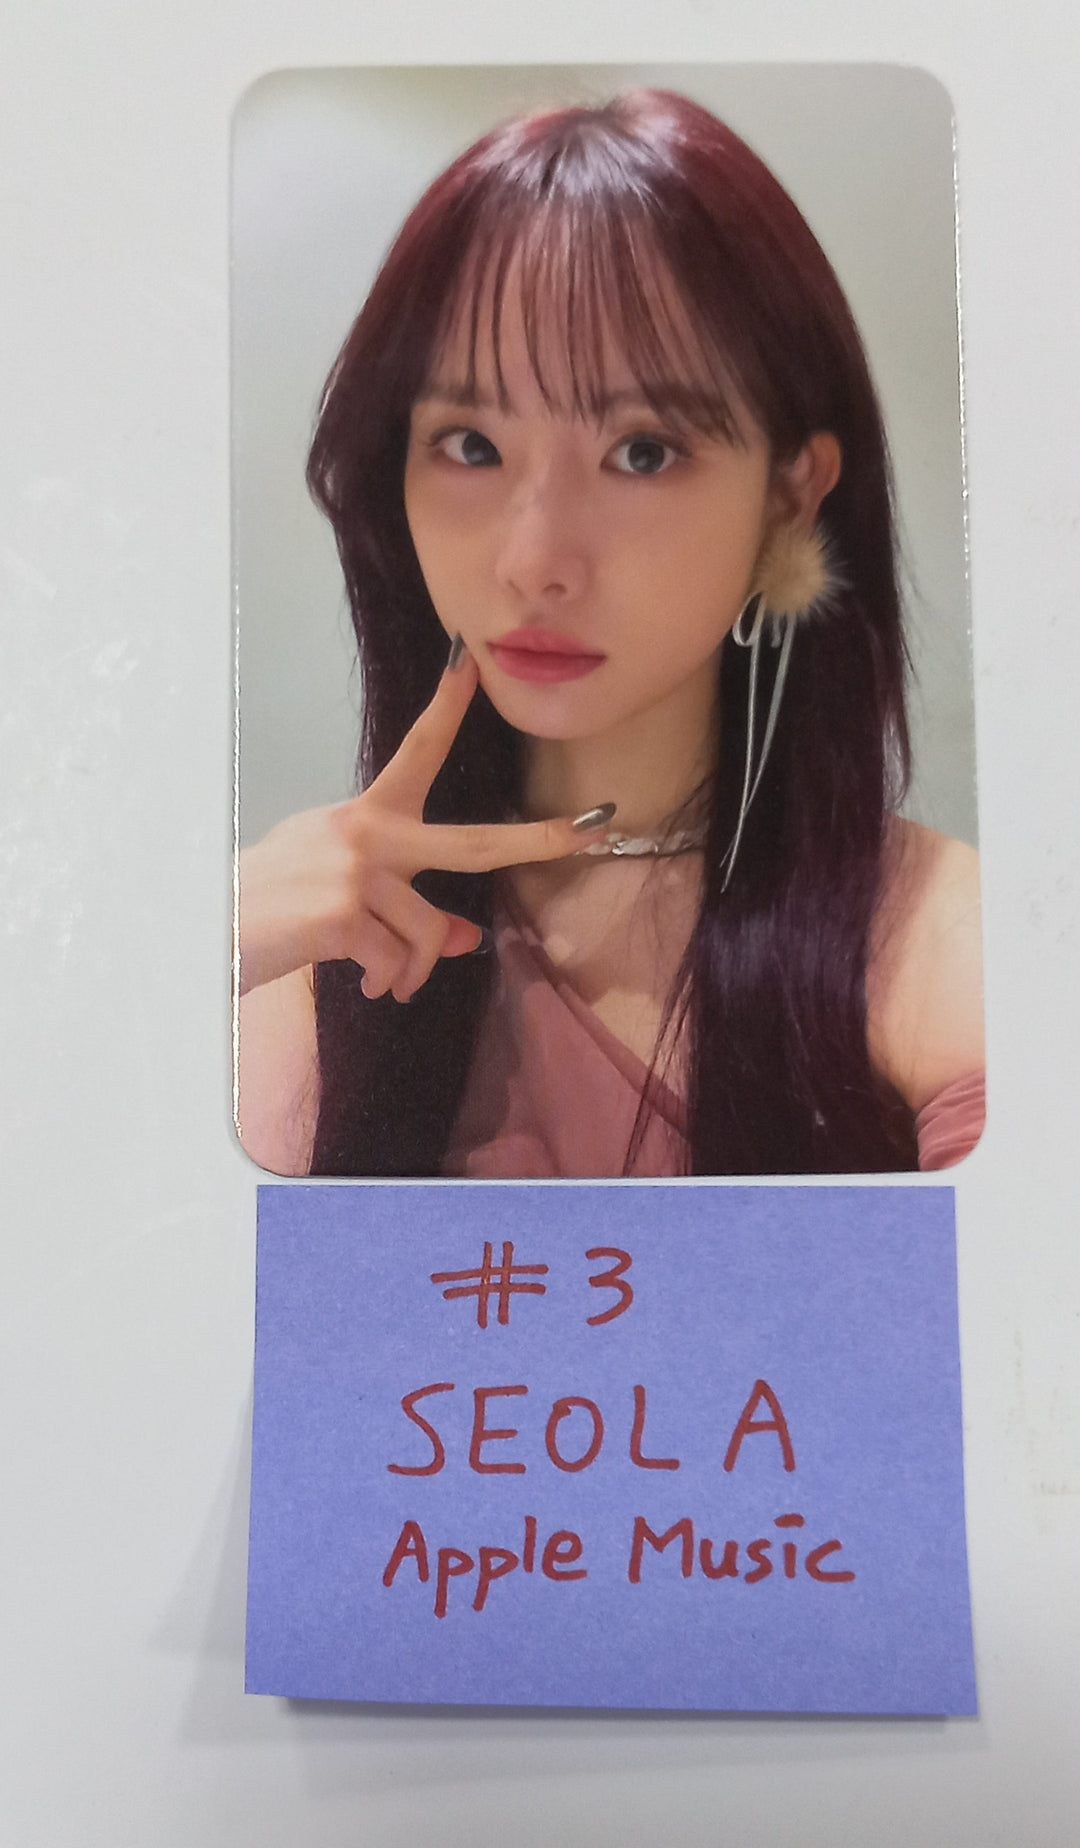 SEOLA (Of WJSN) "INSIDE OUT" - Apple Music Fansign Event Photocard [24.02.22]